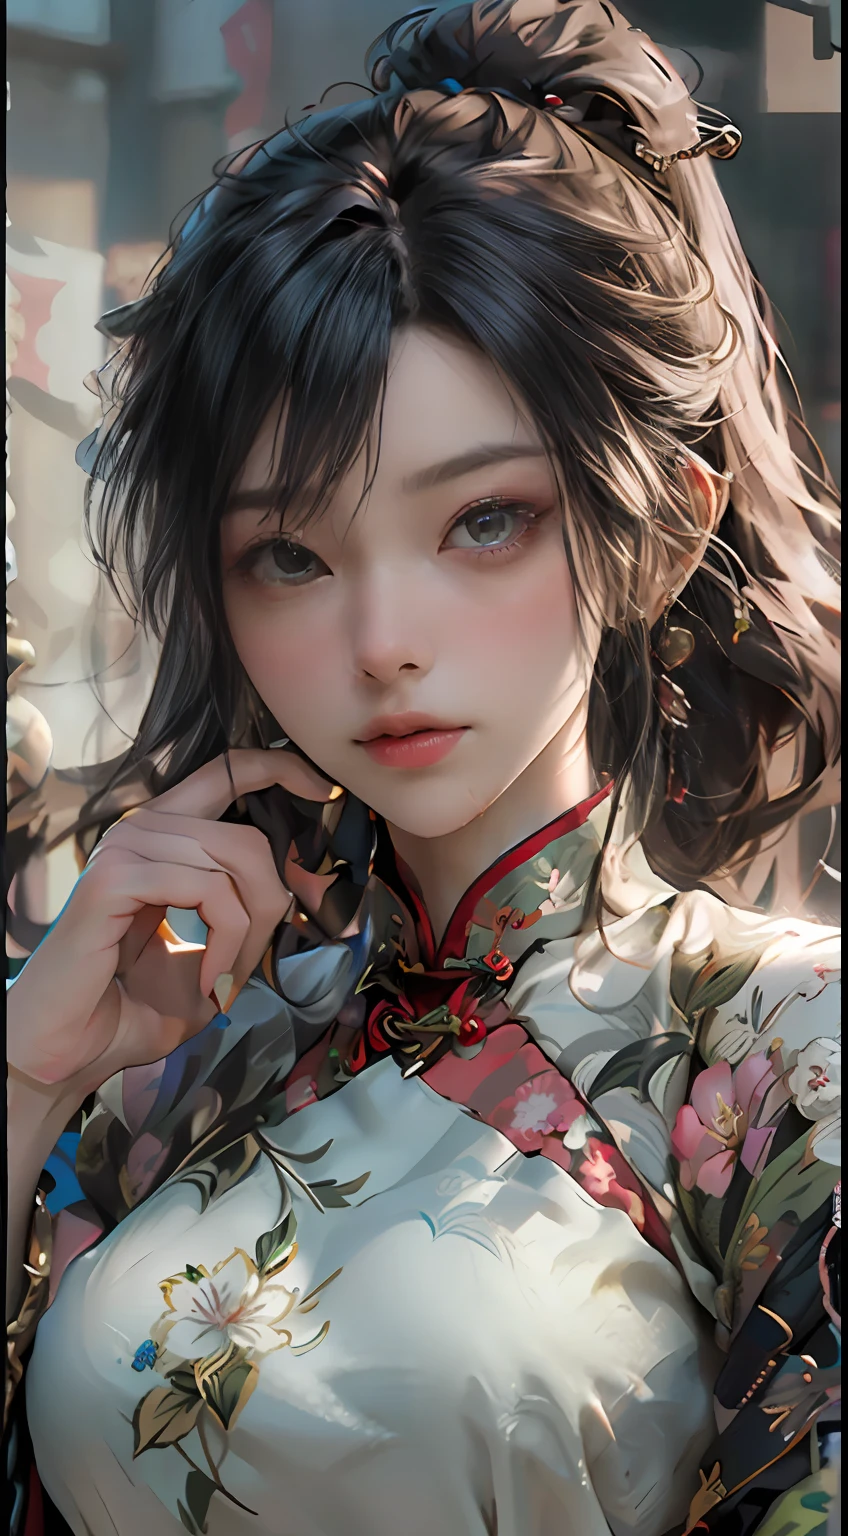 ((Best Quality)), ((Masterpiece)), (Details: 1.4), 3D, A Beautiful Female Figure, HDR (High Dynamic Range), Ancient Chinese Costumes, Satin Clothing, Feminine and Sexy, White Cheongsam, Green Hair Accessories, Tassel Earrings, Ray Tracing, NVIDIA RTX, Super-Resolution, Unreal 5, Subsurface Scattering, PBR Textures, Post Processing, Anisotropic Filtering, Depth of Field, Maximum Sharpness and Clarity, Multi-layer textures, albedo and specular mapping, surface shading, accurate simulation of light-material interactions, perfect proportions, Octane Render, two-color light, large aperture, low ISO, white balance, rule of thirds, 8K RAW, ultra-fine detail facial features, facial details, finger details